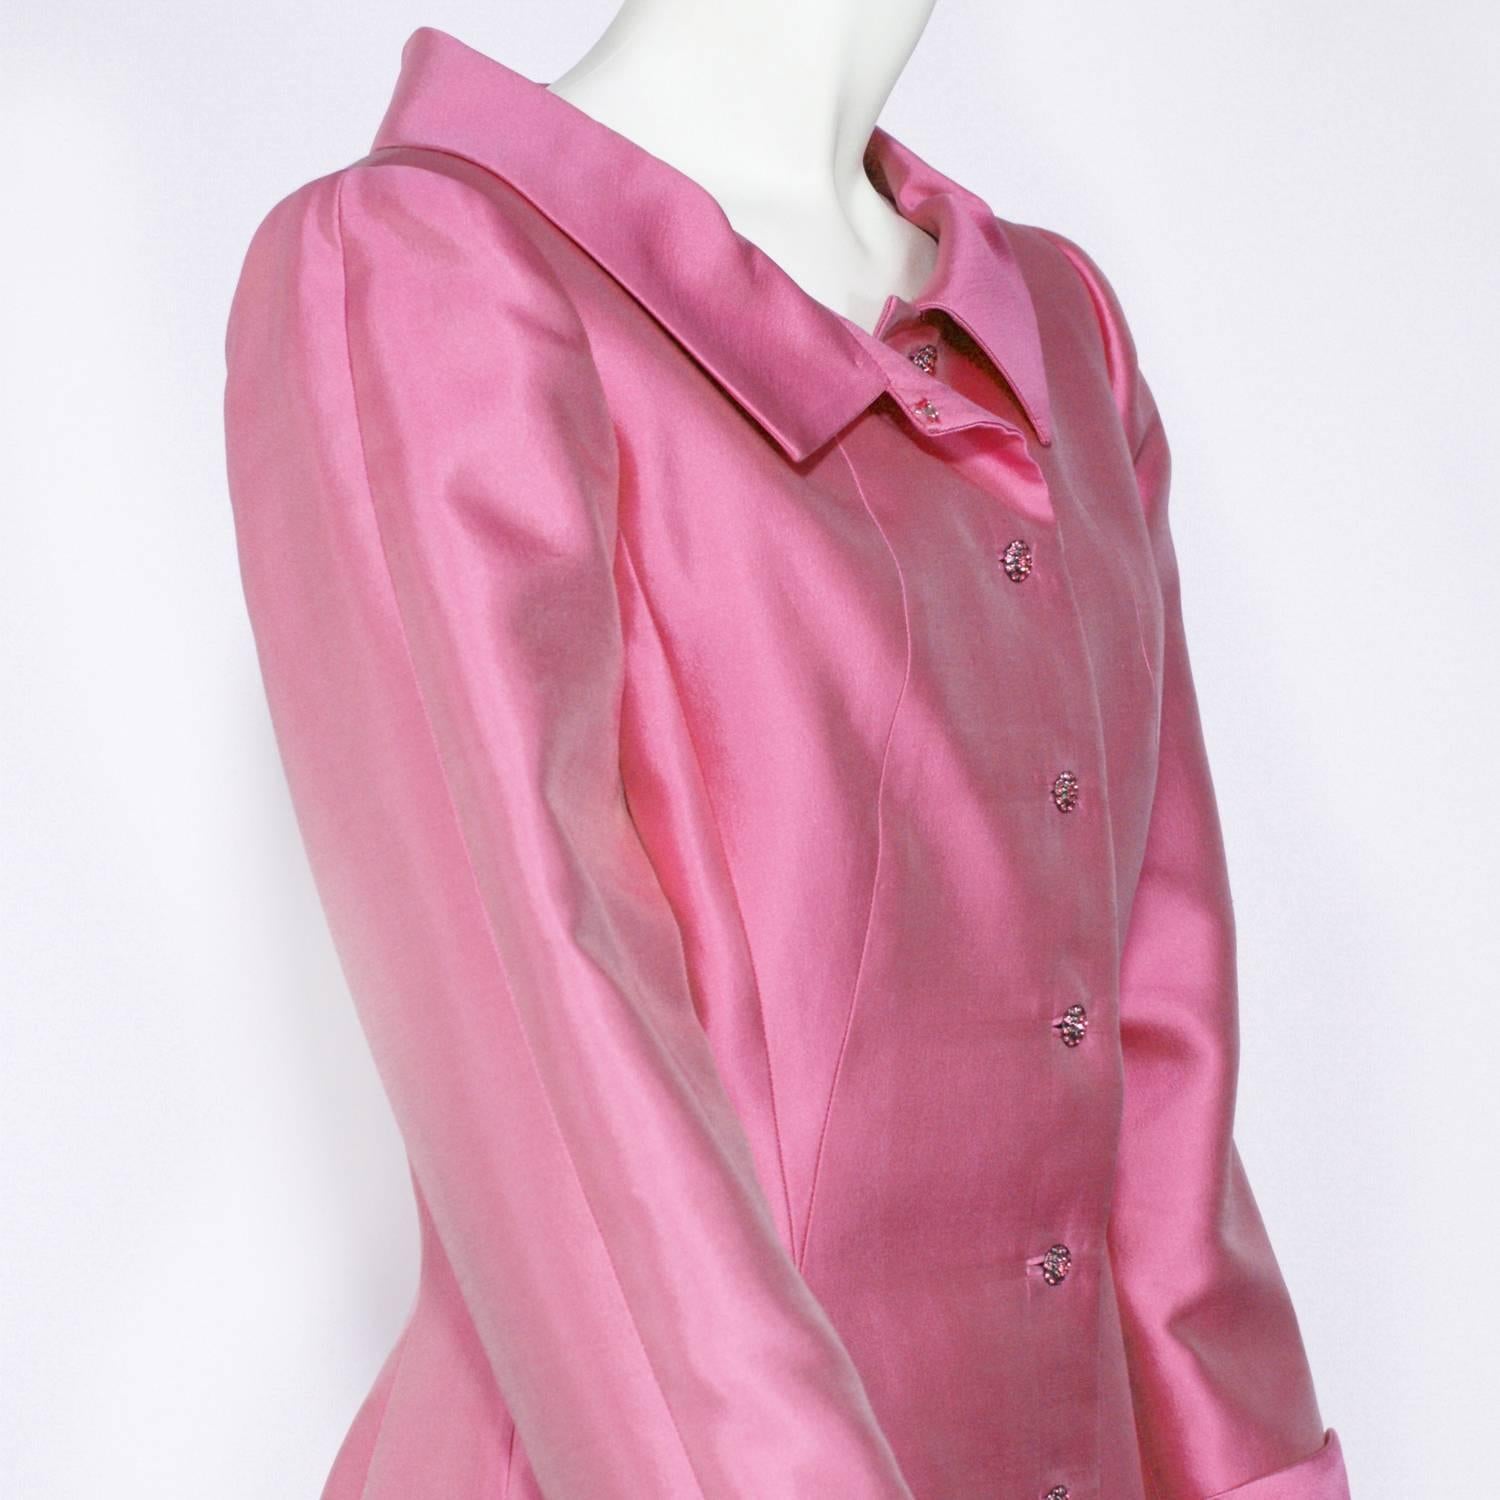 Oscar de la Renta Pink Button Down Coat In Excellent Condition For Sale In Narberth, PA